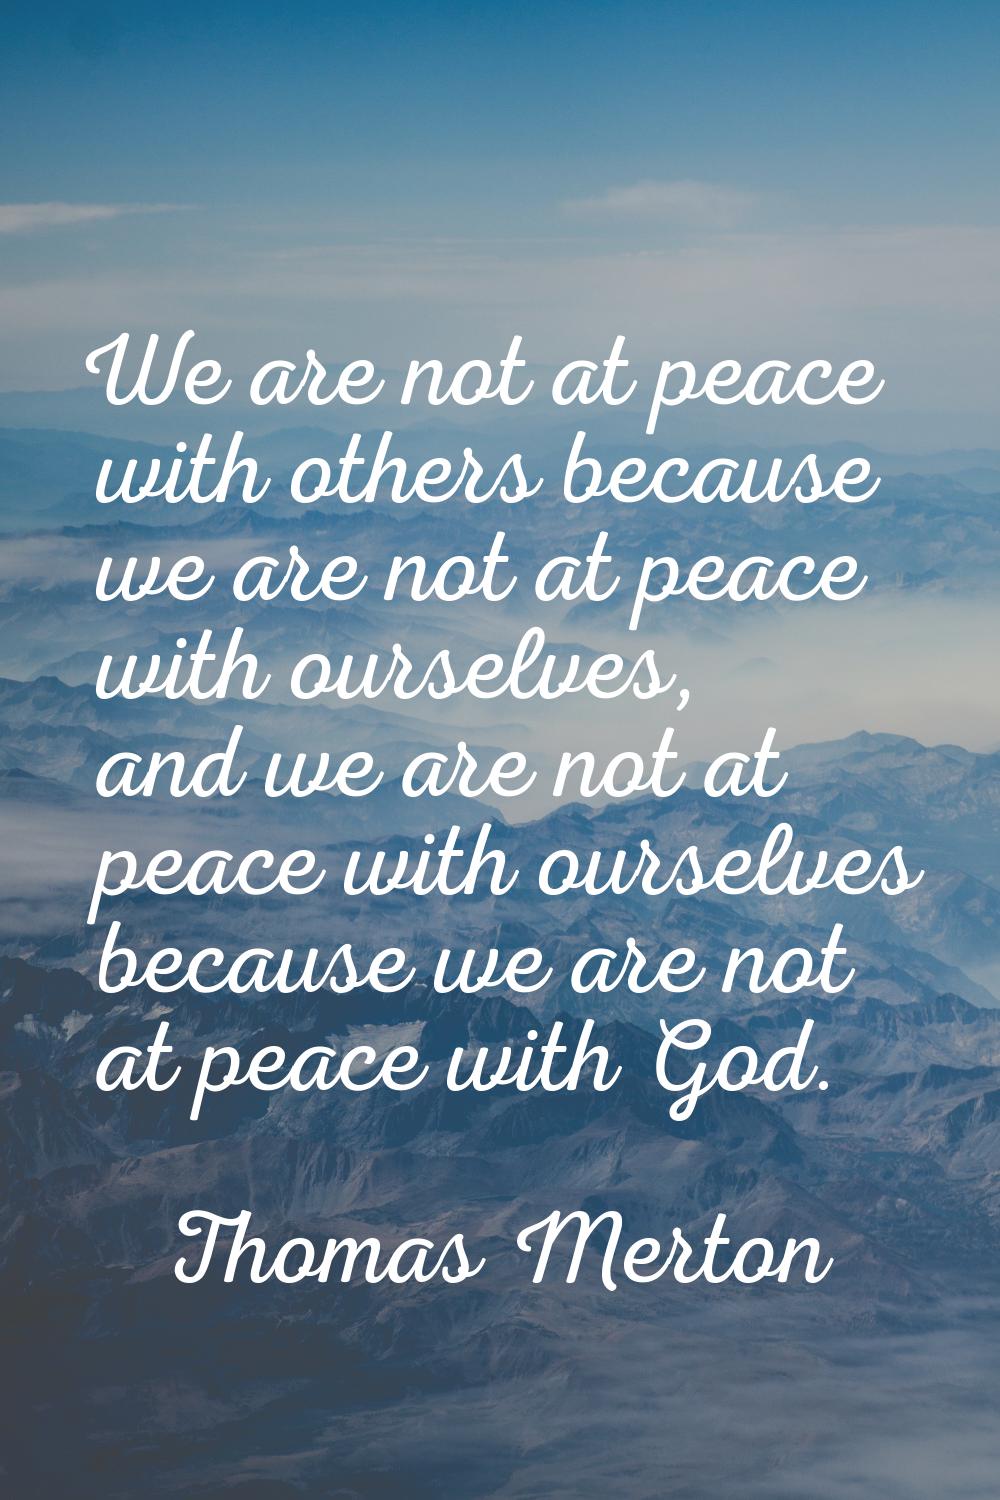 We are not at peace with others because we are not at peace with ourselves, and we are not at peace